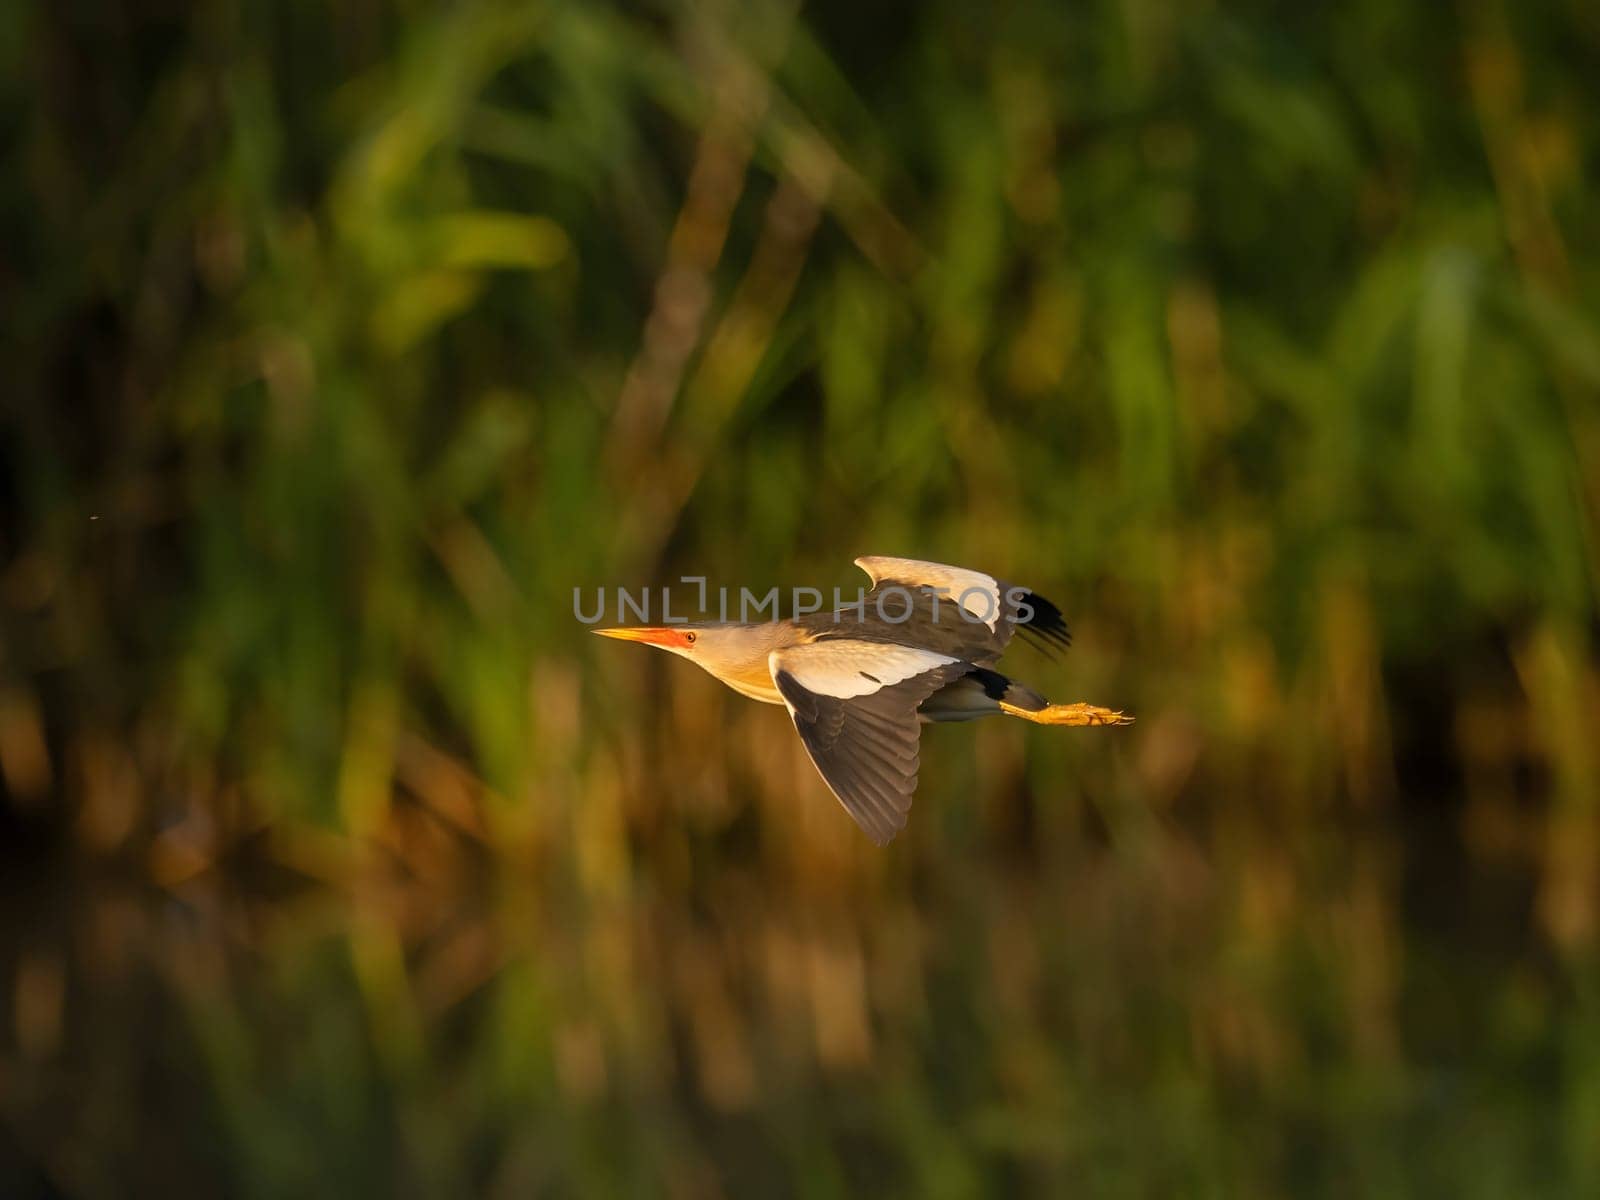 A Little Bittern gracefully soaring through lush green foliage, its slender form blending seamlessly with its natural surroundings.